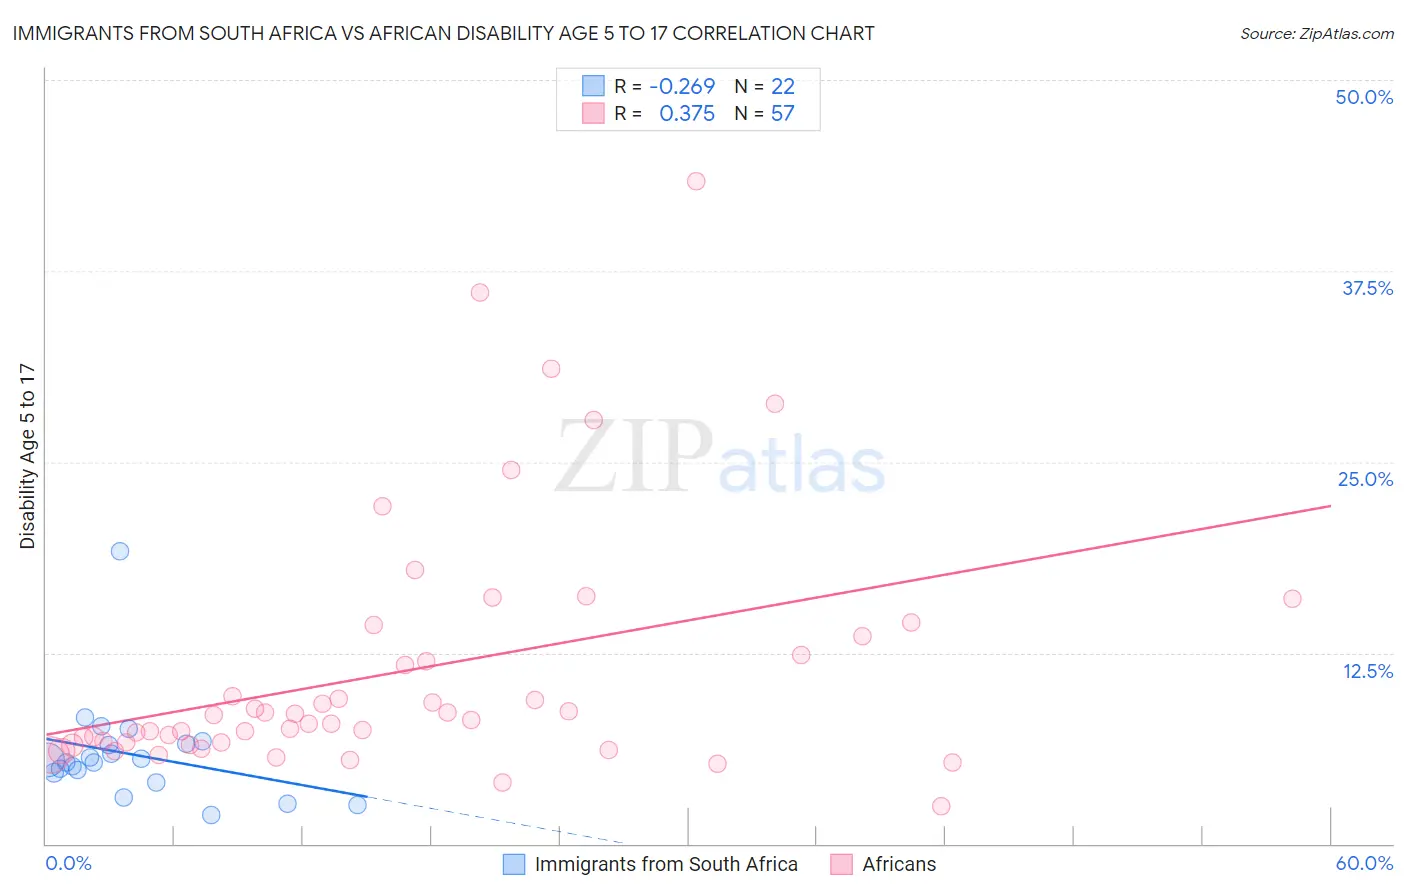 Immigrants from South Africa vs African Disability Age 5 to 17